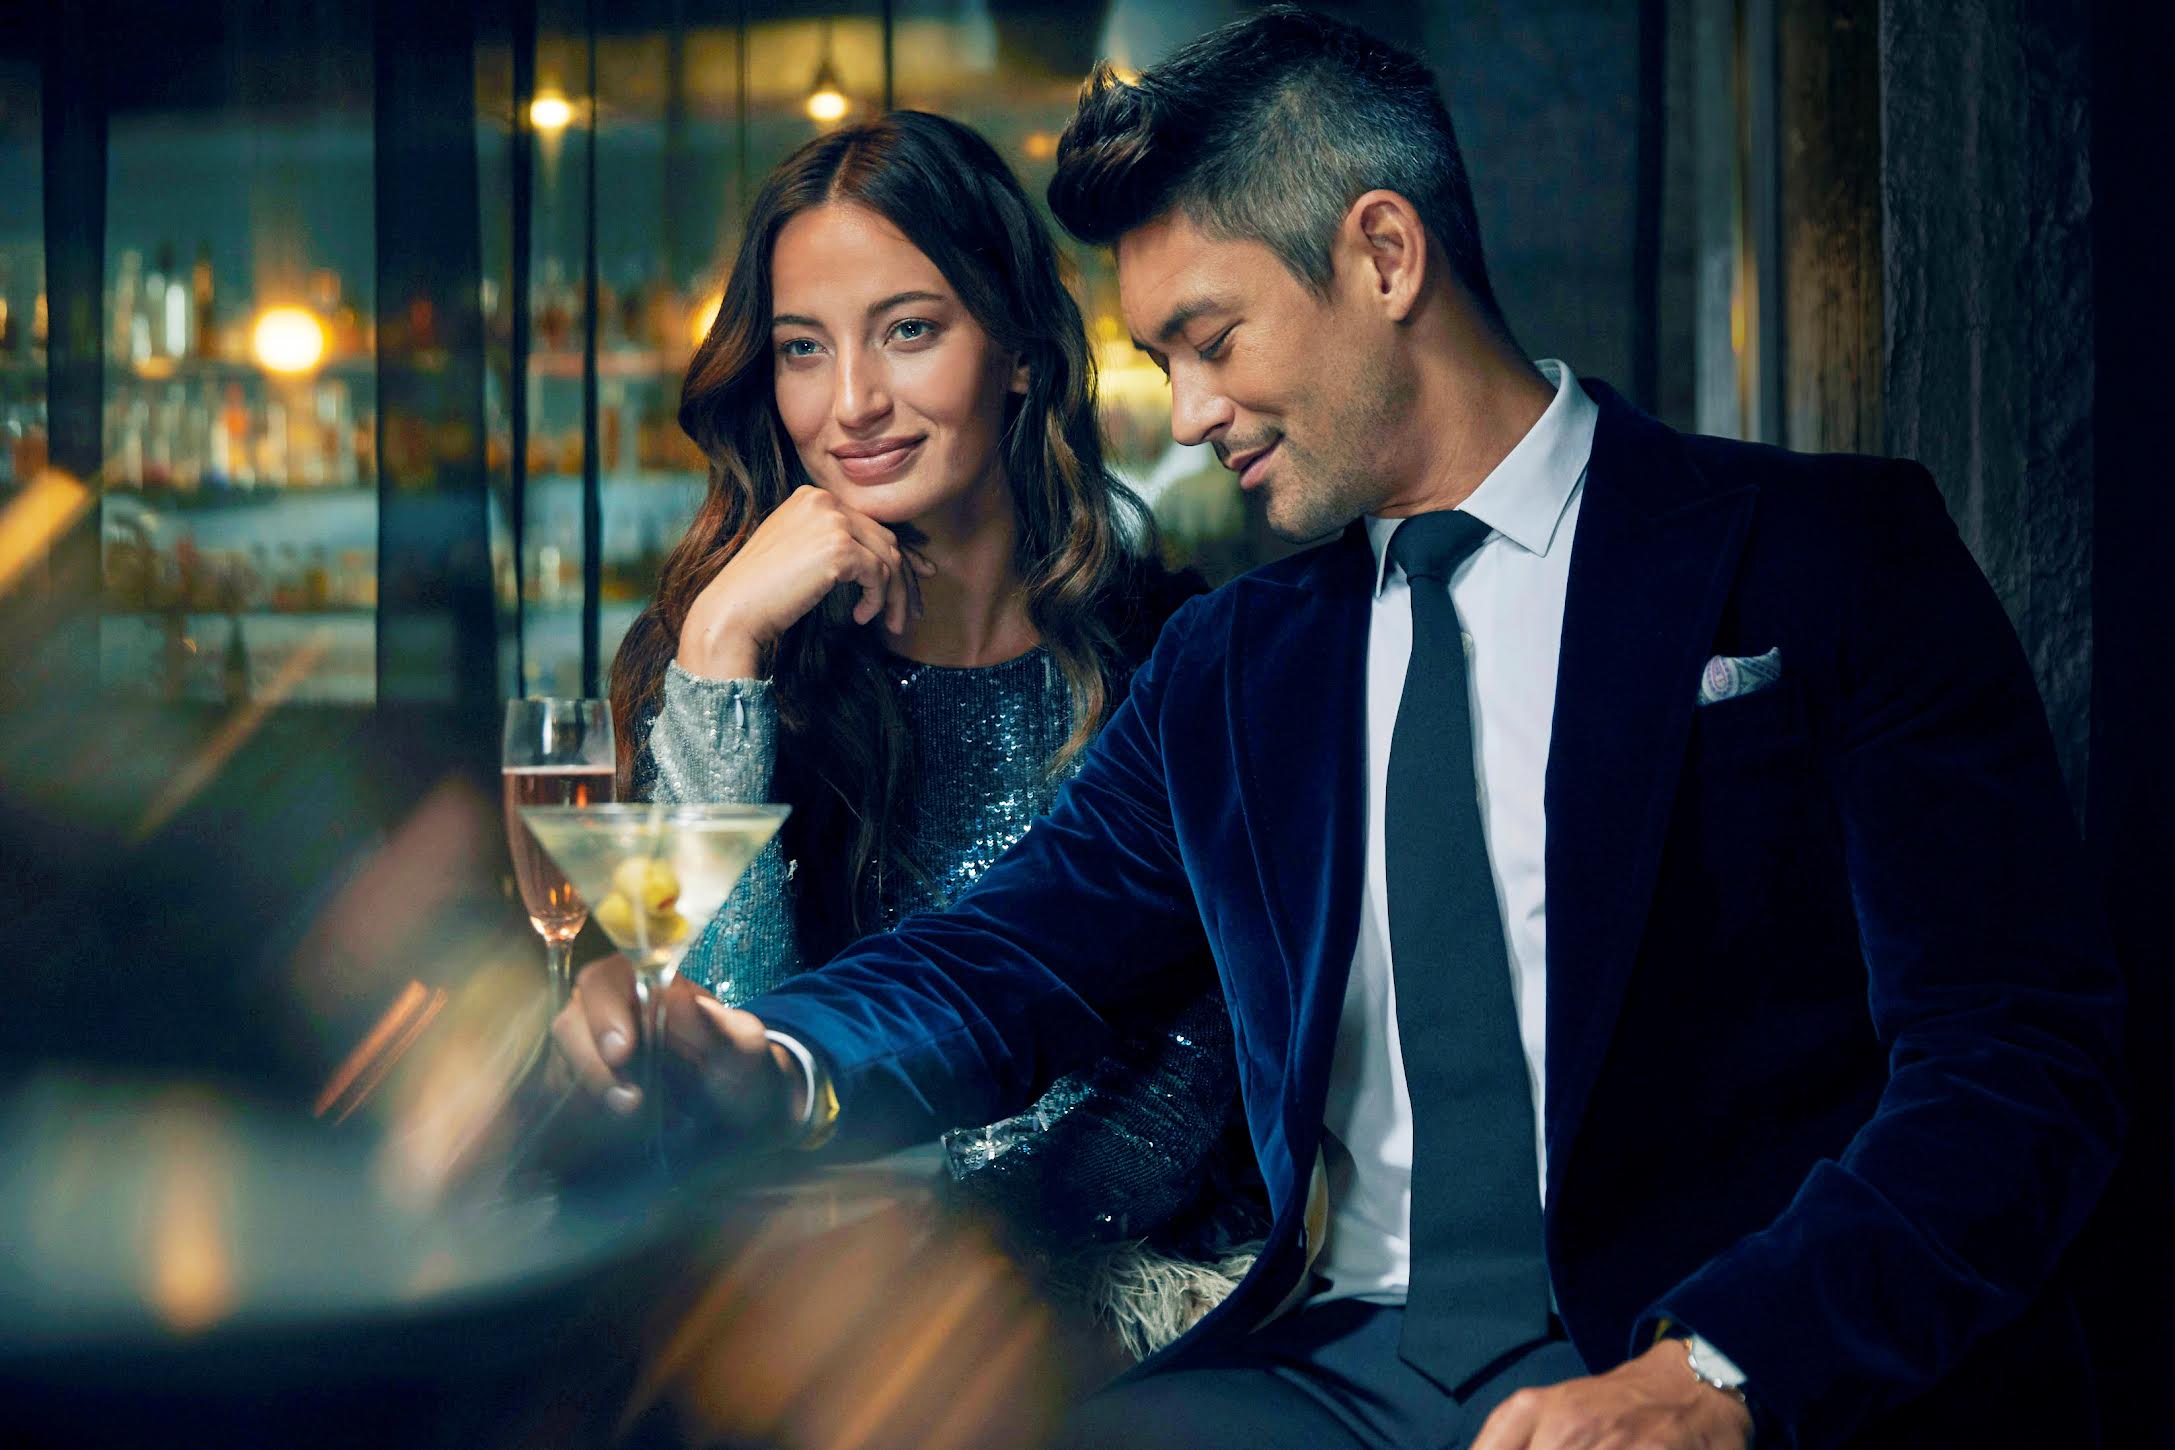 Celebrate New Year’s Eve at The Bellevue Collection